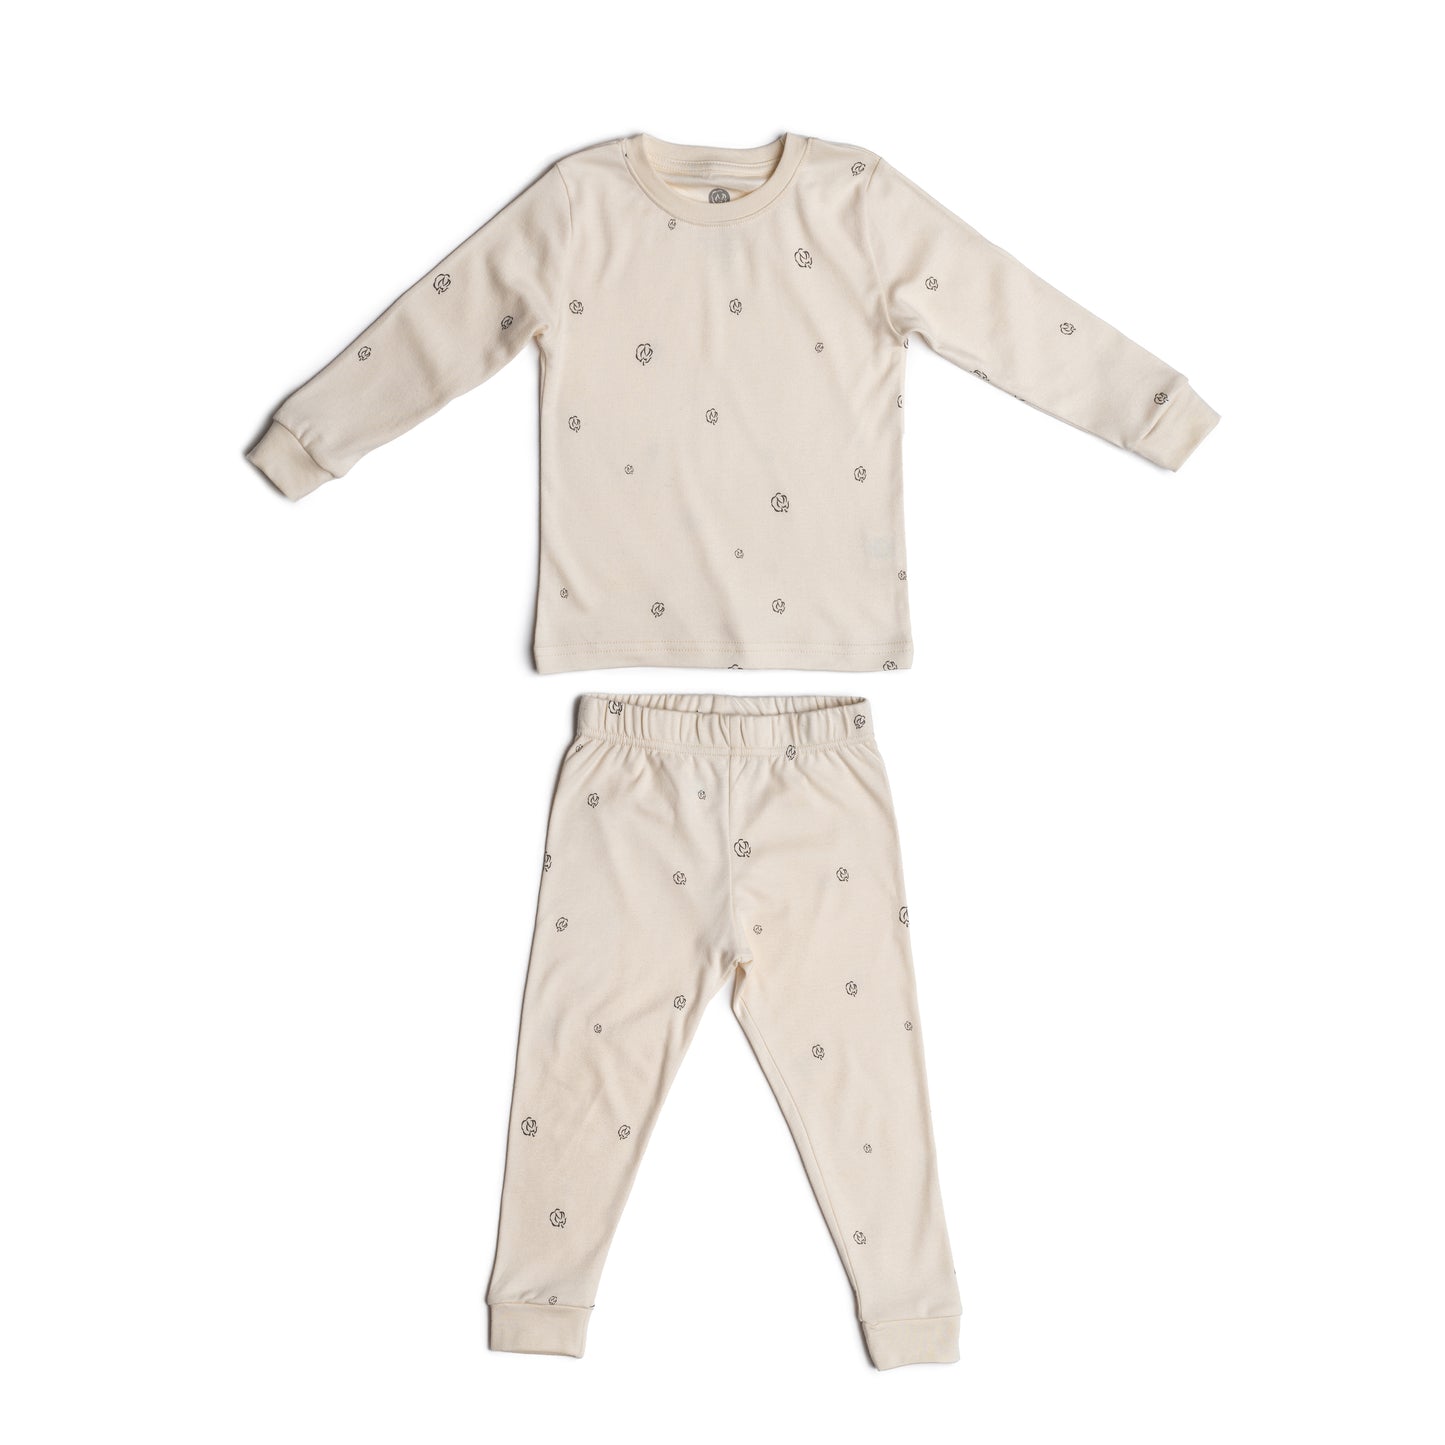 Pajama Set, Long Sleeve T-Shirt and Pants - Alabaster with Cotton Bloom